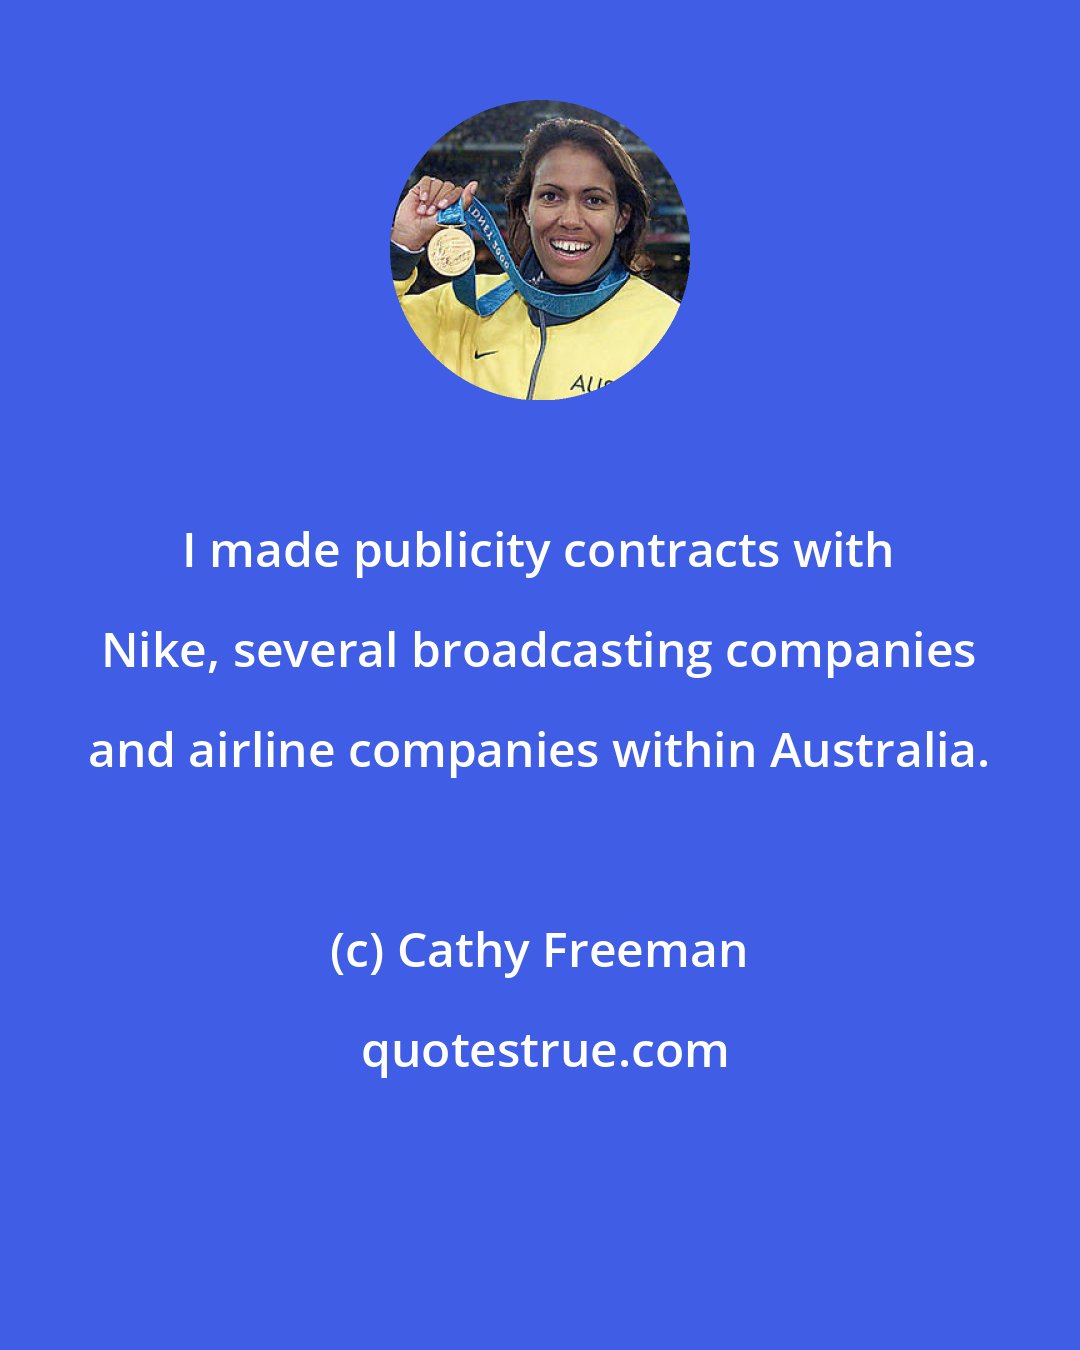 Cathy Freeman: I made publicity contracts with Nike, several broadcasting companies and airline companies within Australia.